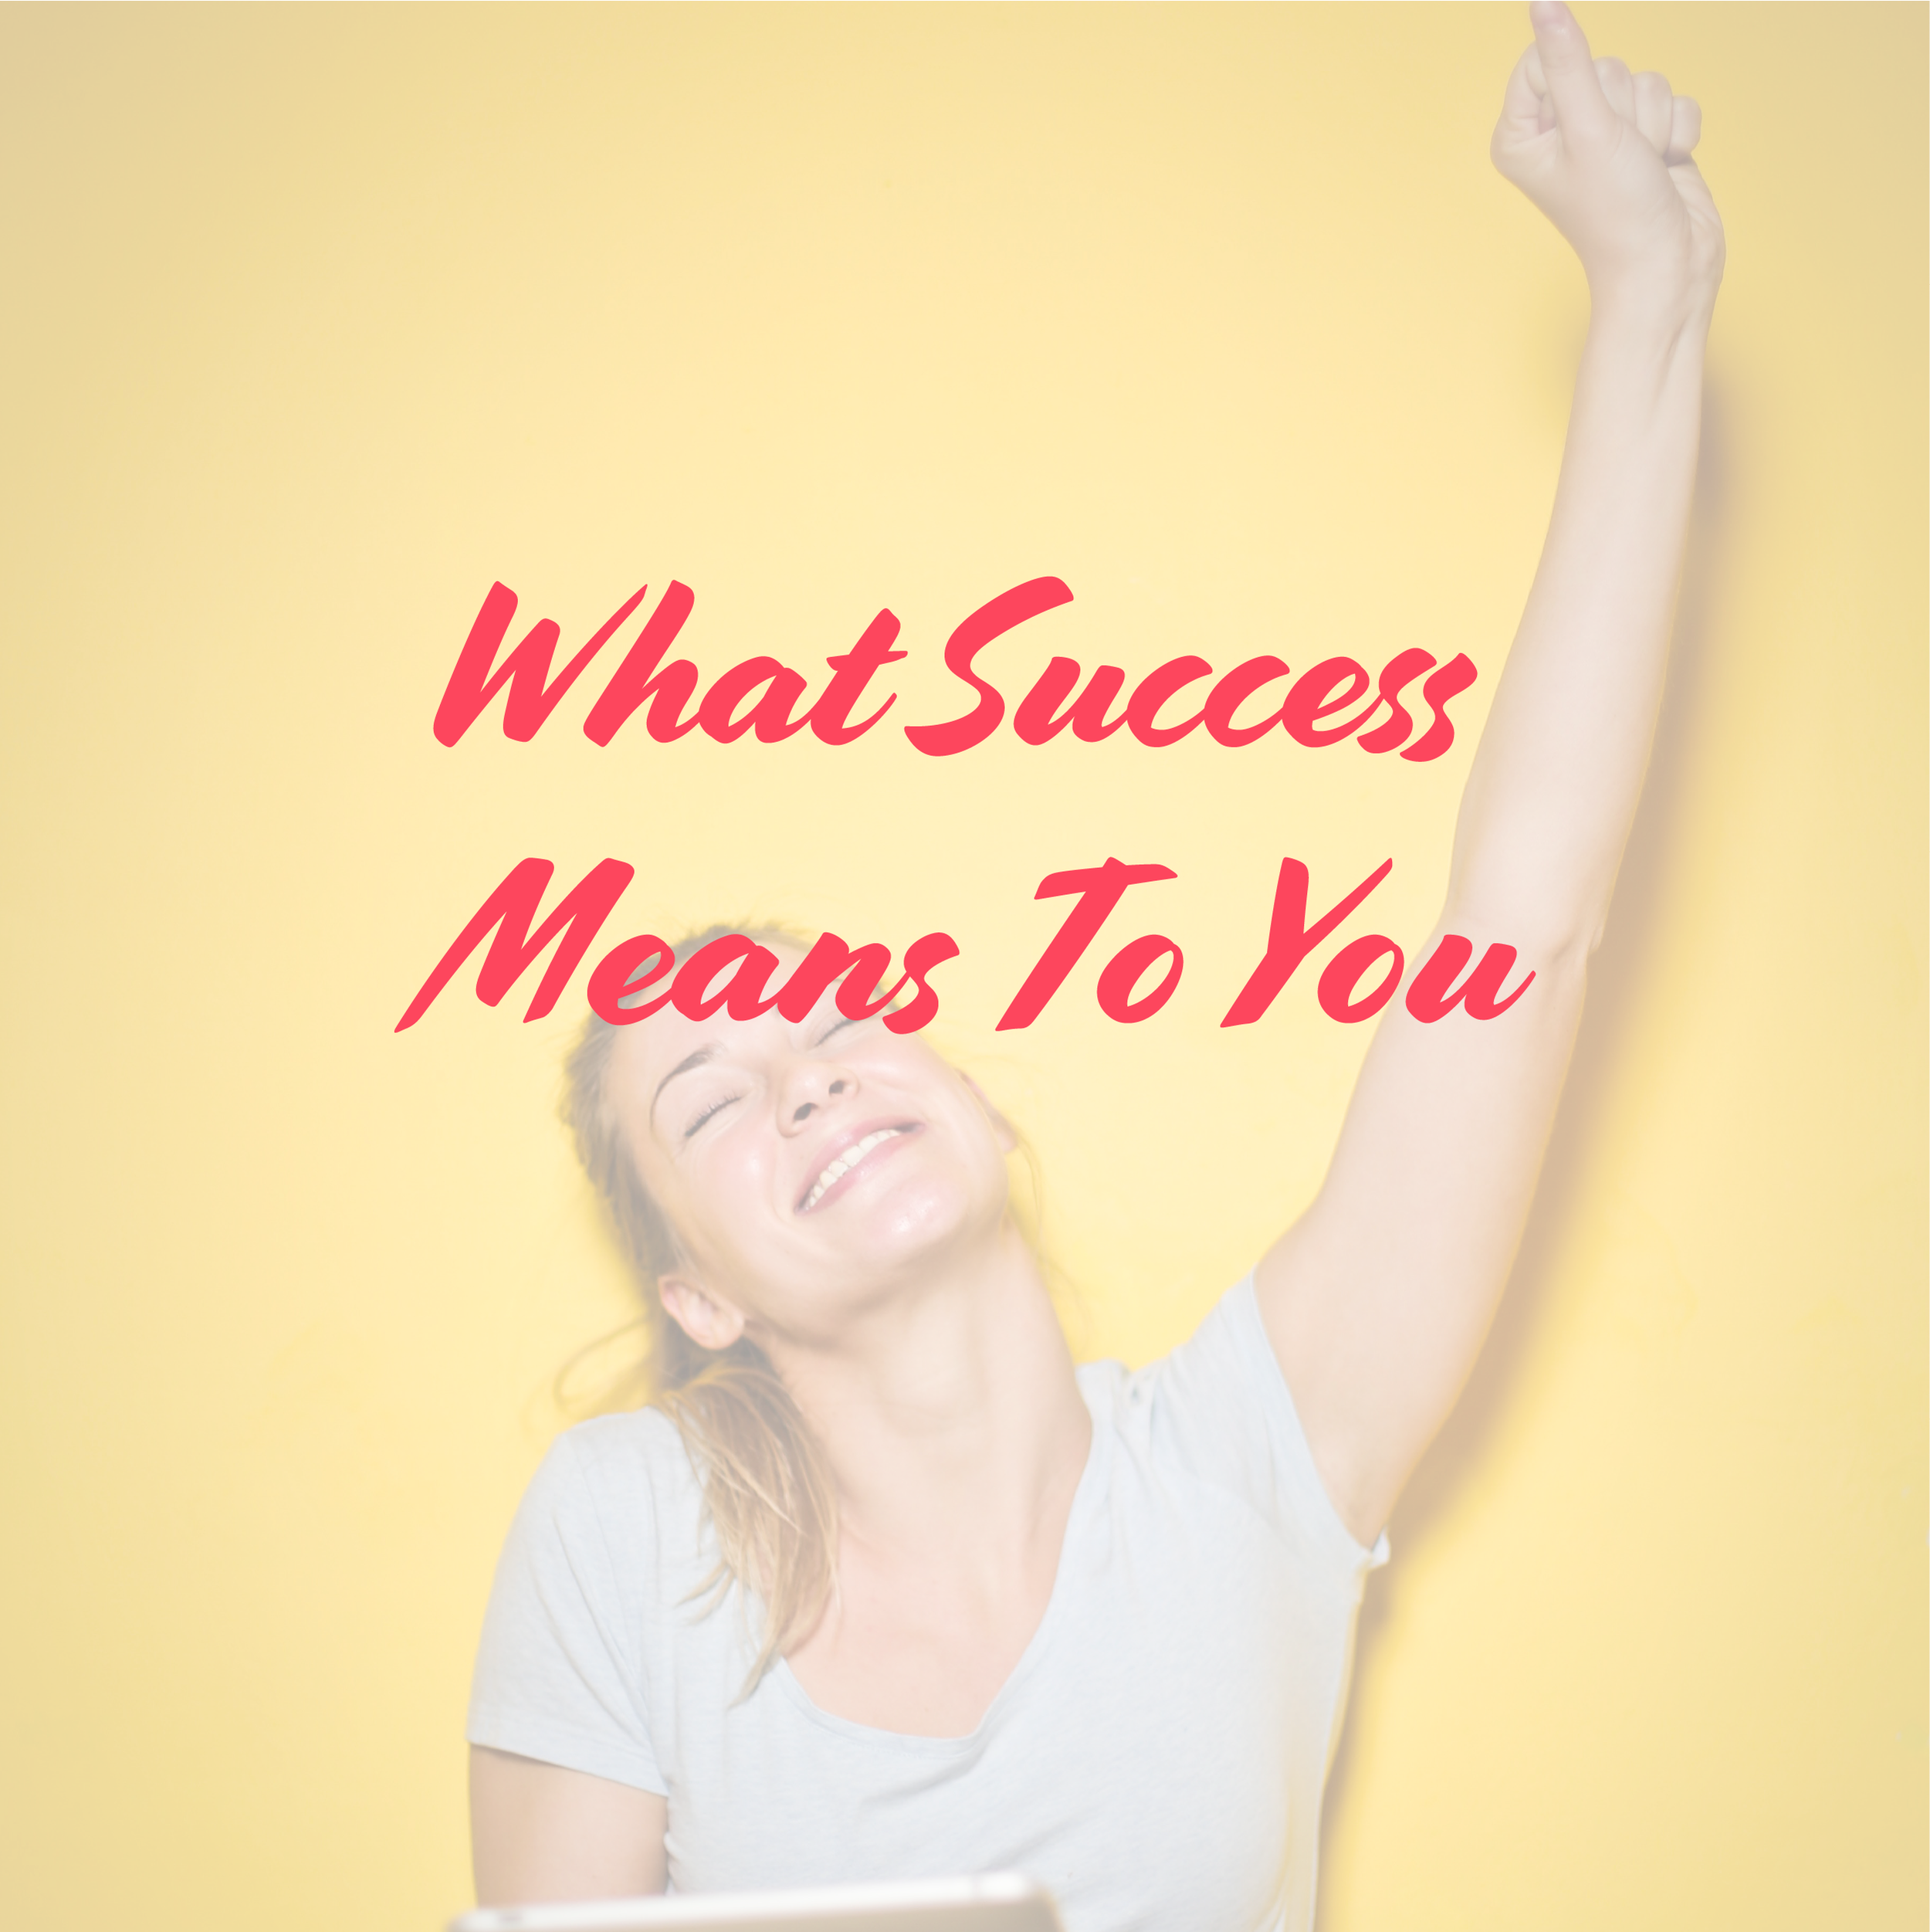 what is the meaning of success to you